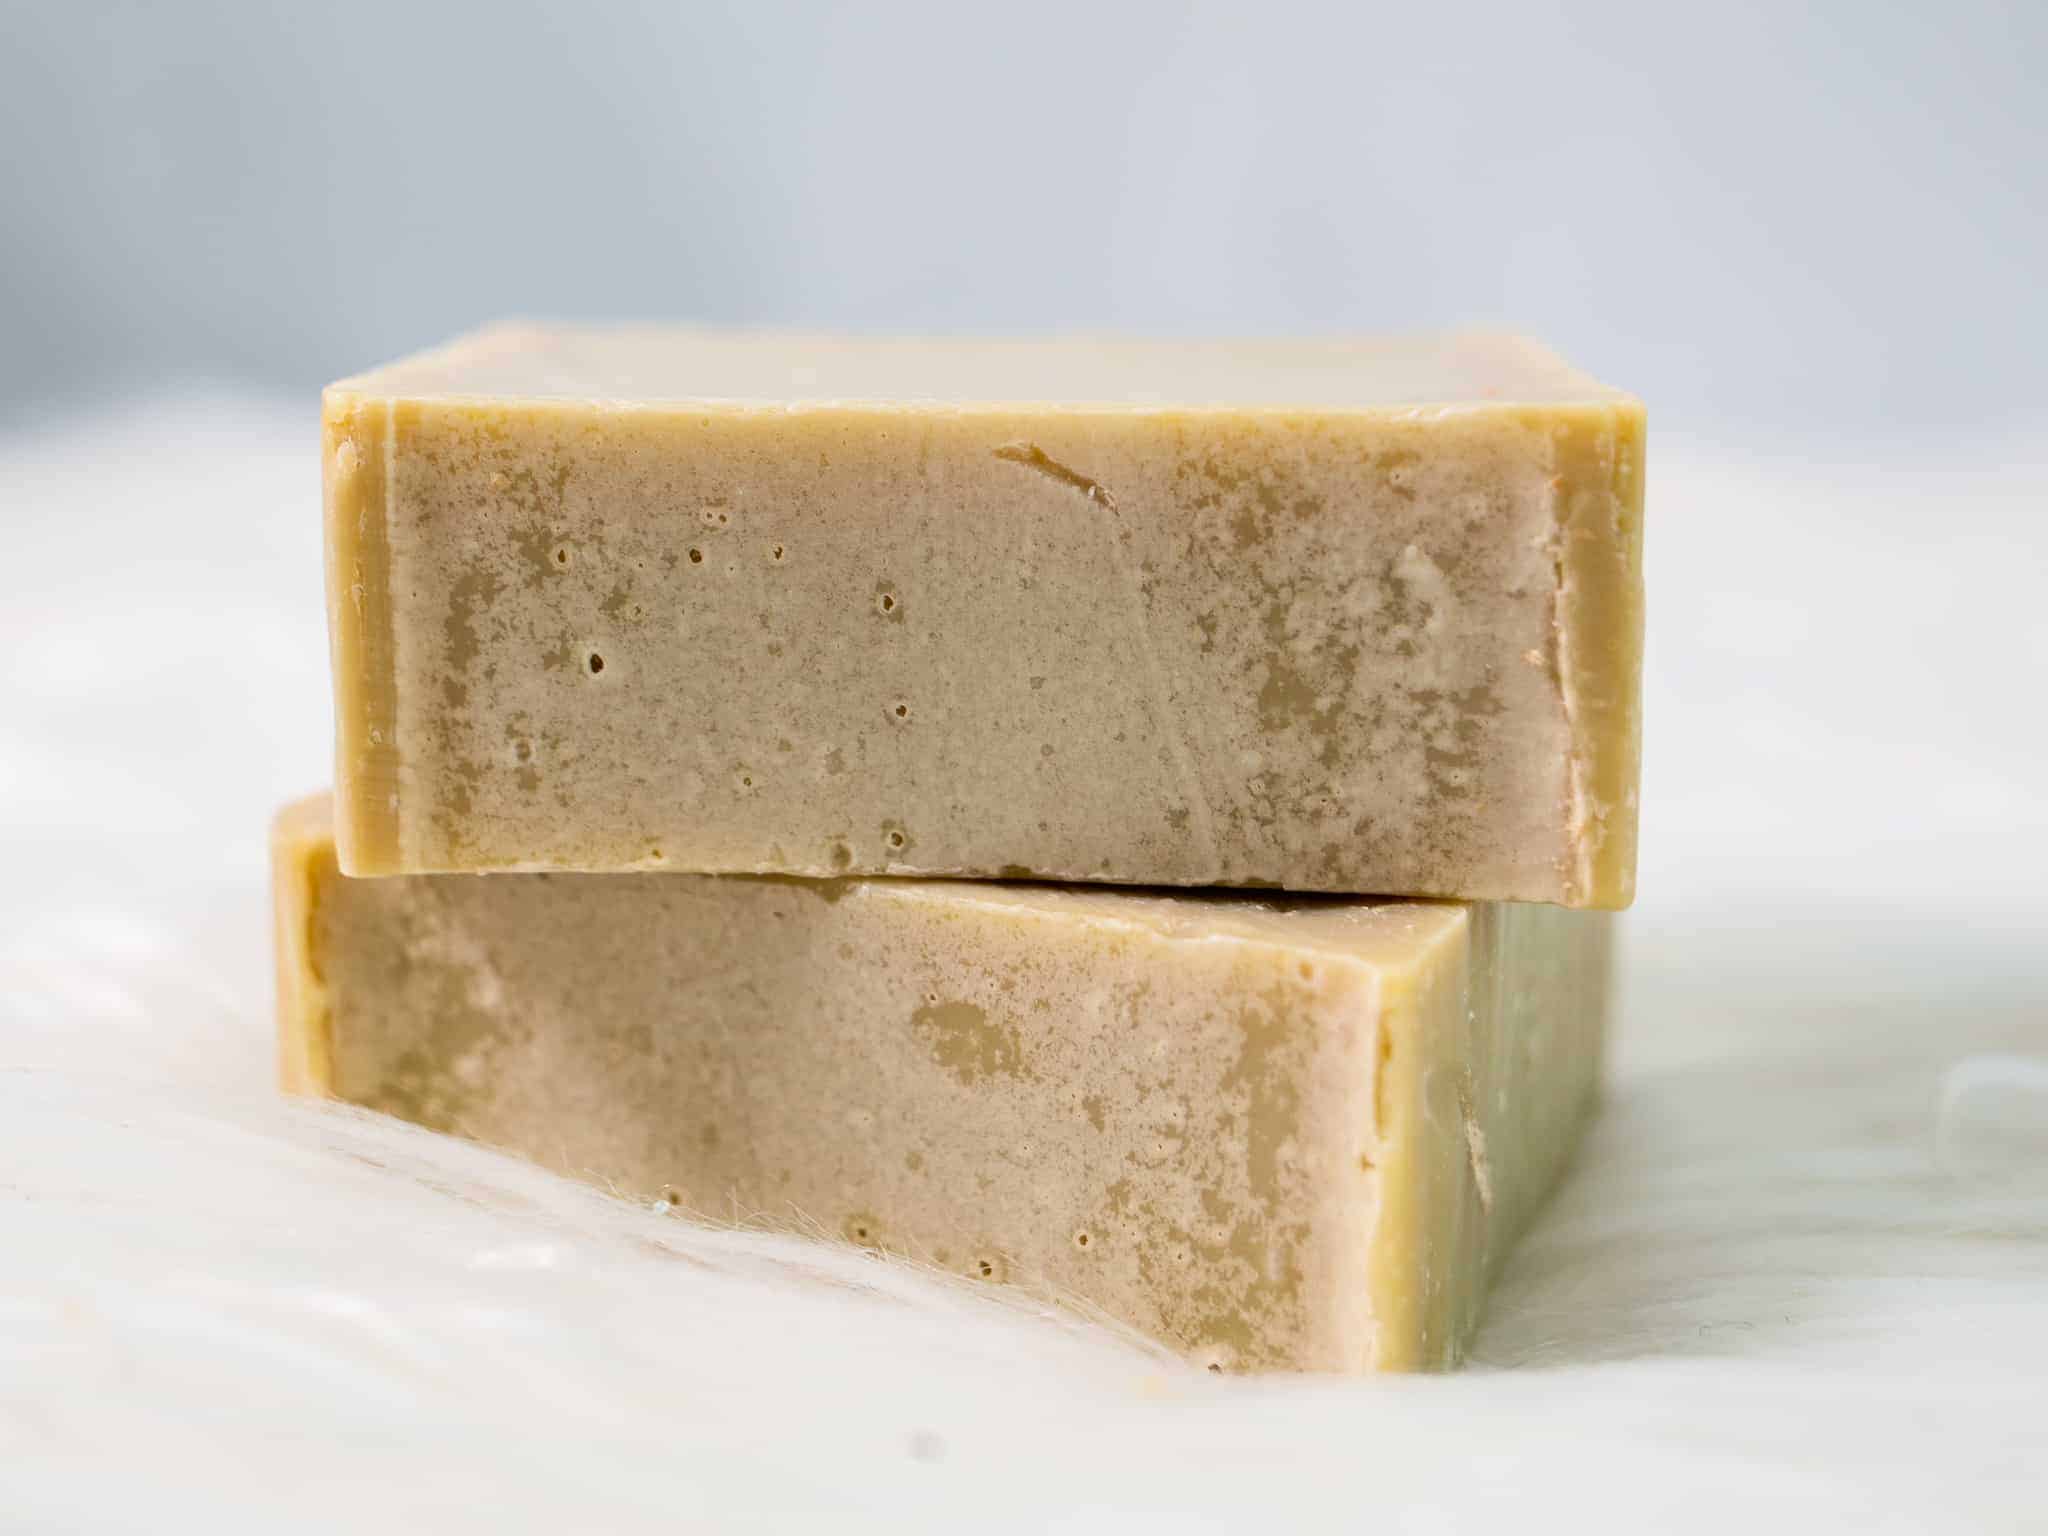 This Aleppo Soap  Vegan specialty bar- no added scent. is made with love by Sudzy Bums! Shop more unique gift ideas today with Spots Initiatives, the best way to support creators.